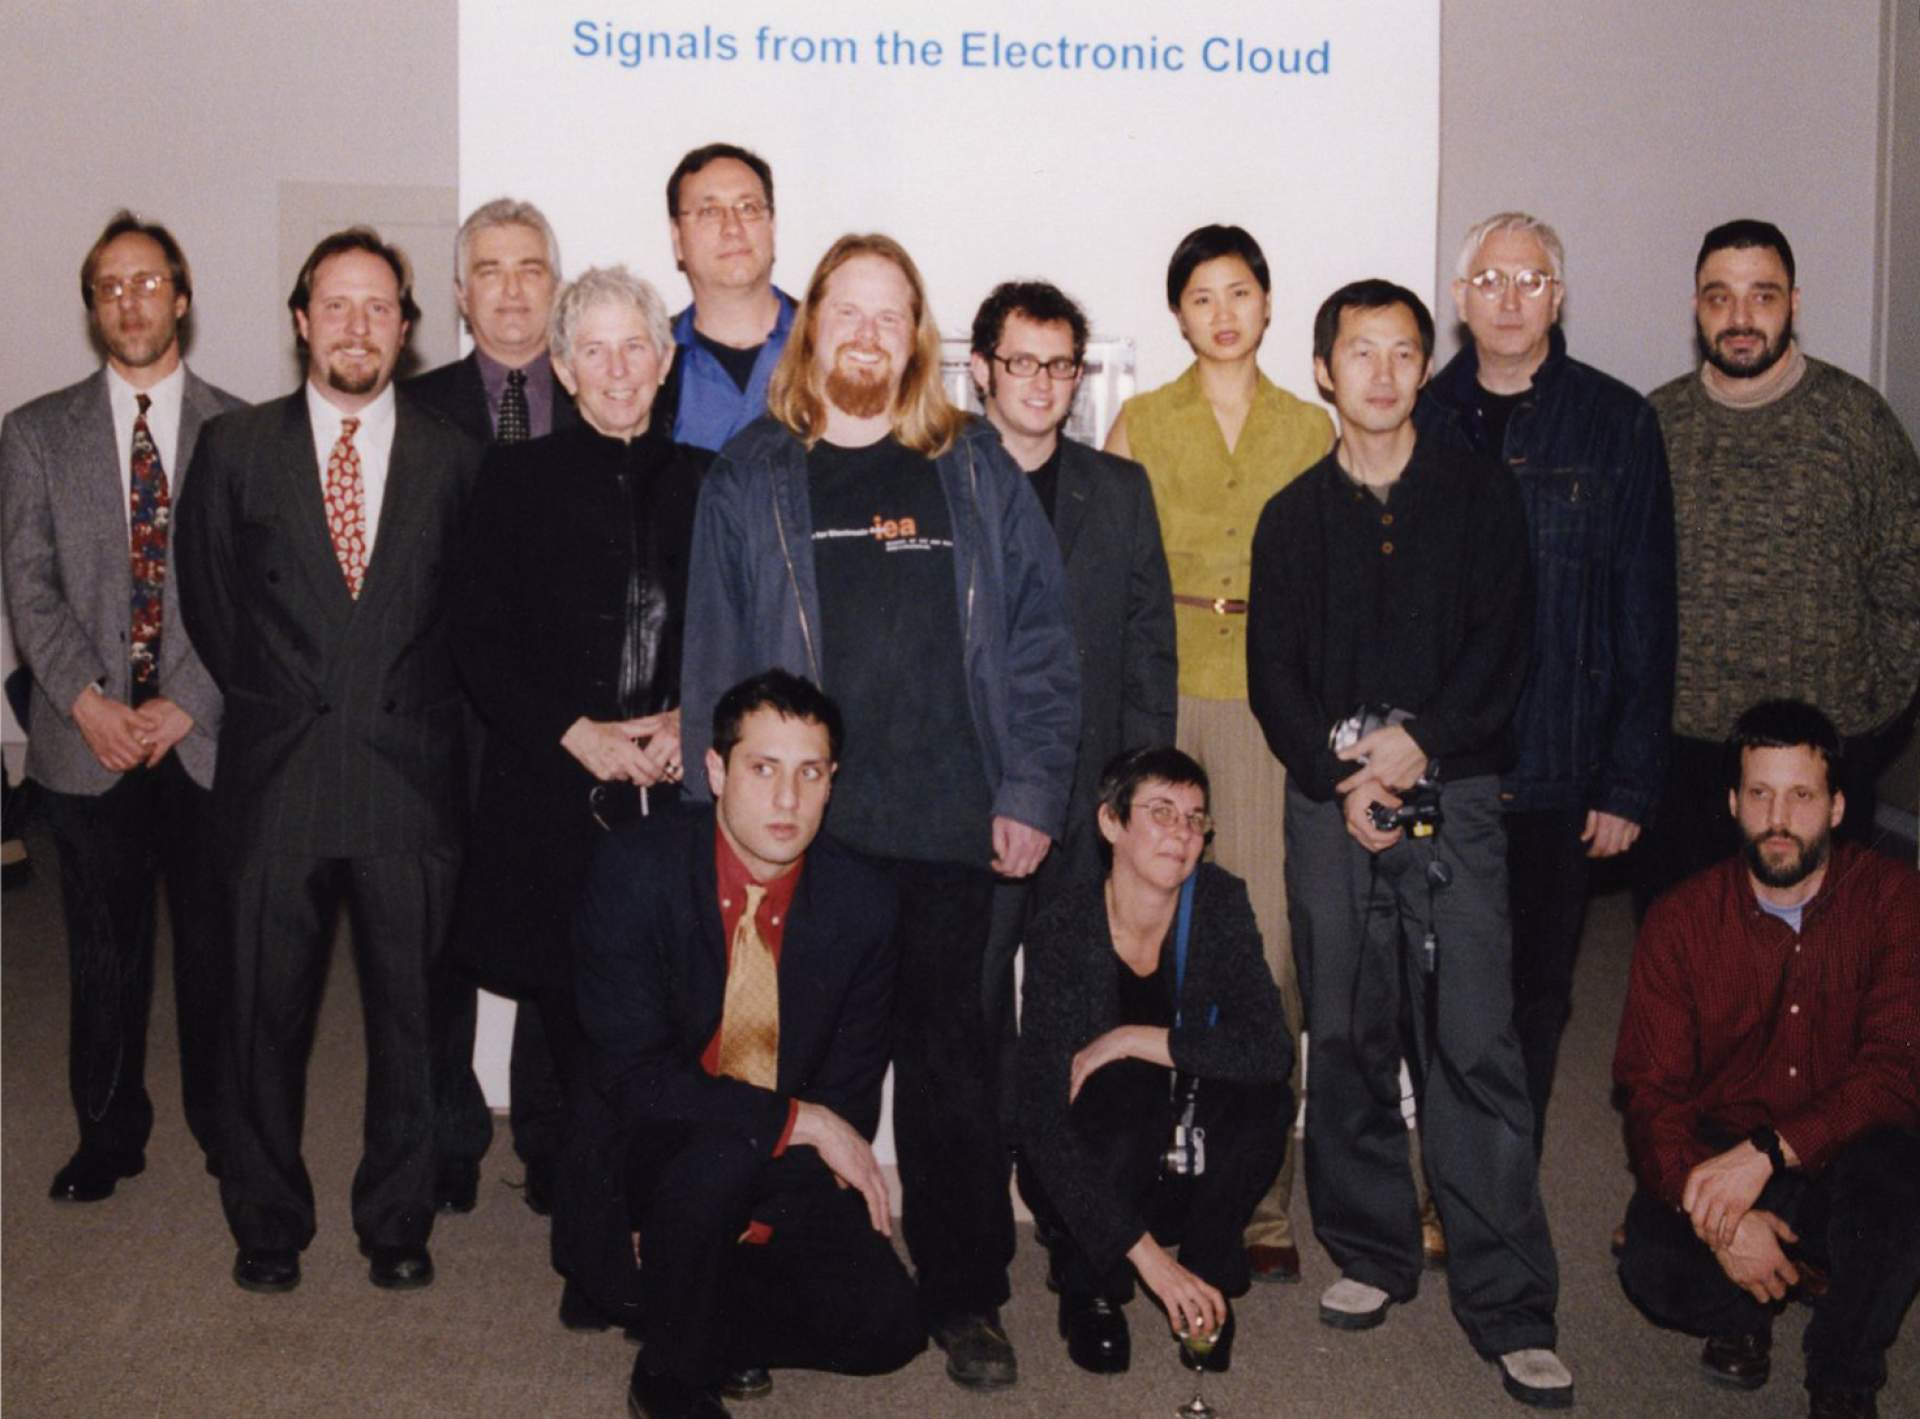 Electronic Arts and Burchfield Penney Staff at the opening of "Signals from the Electronic Cloud" opening